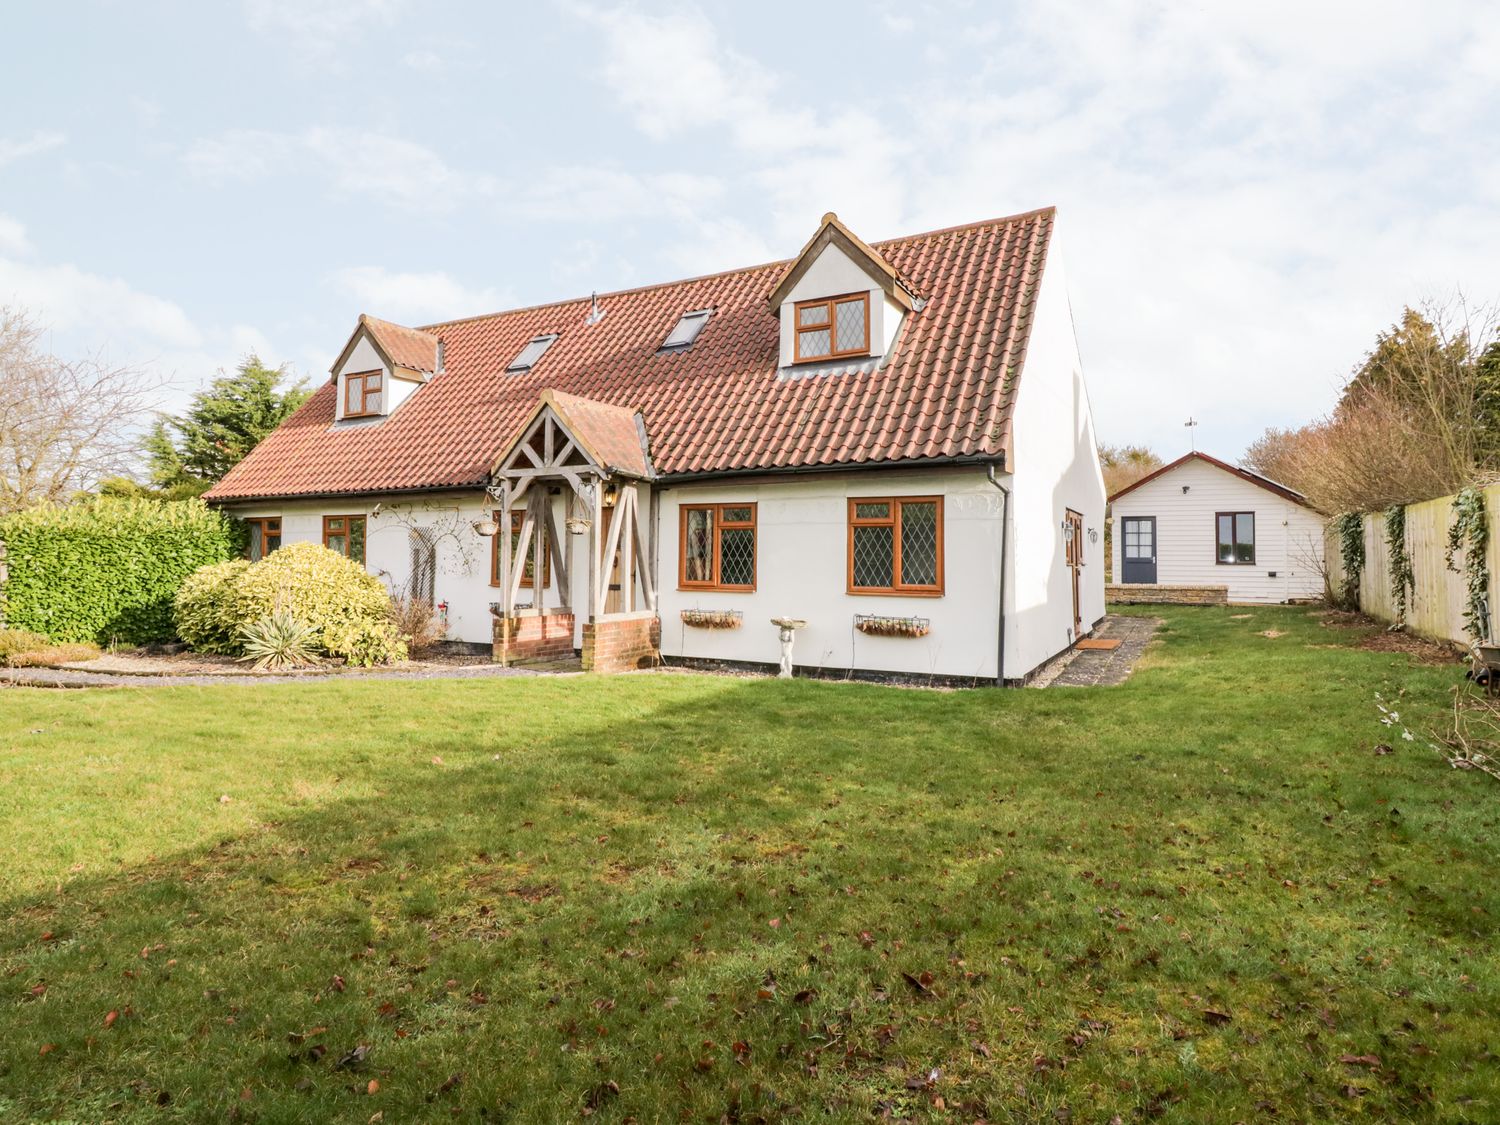 West View Cottage - Central England - 1027108 - photo 1